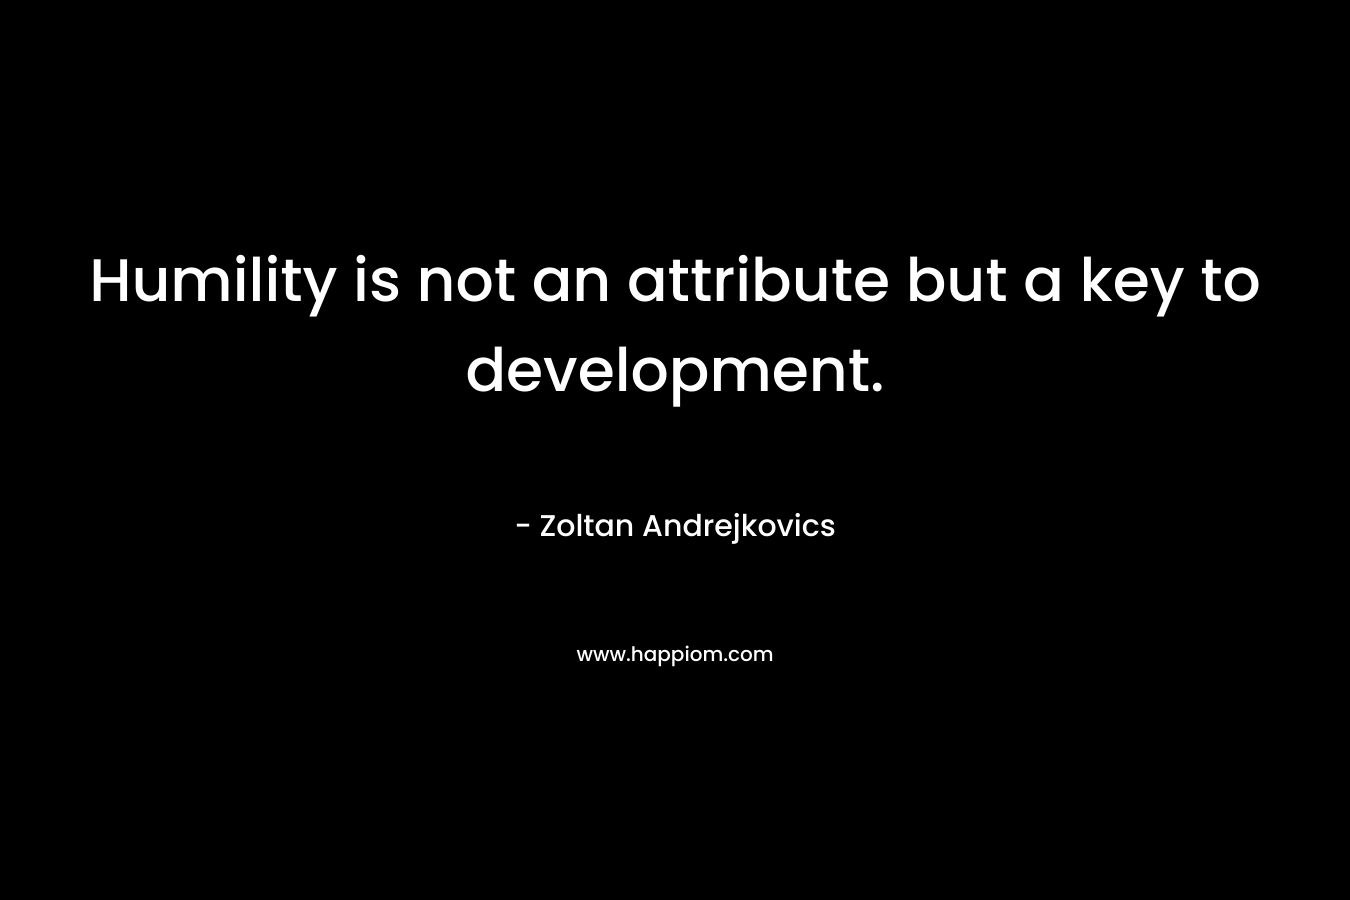 Humility is not an attribute but a key to development.